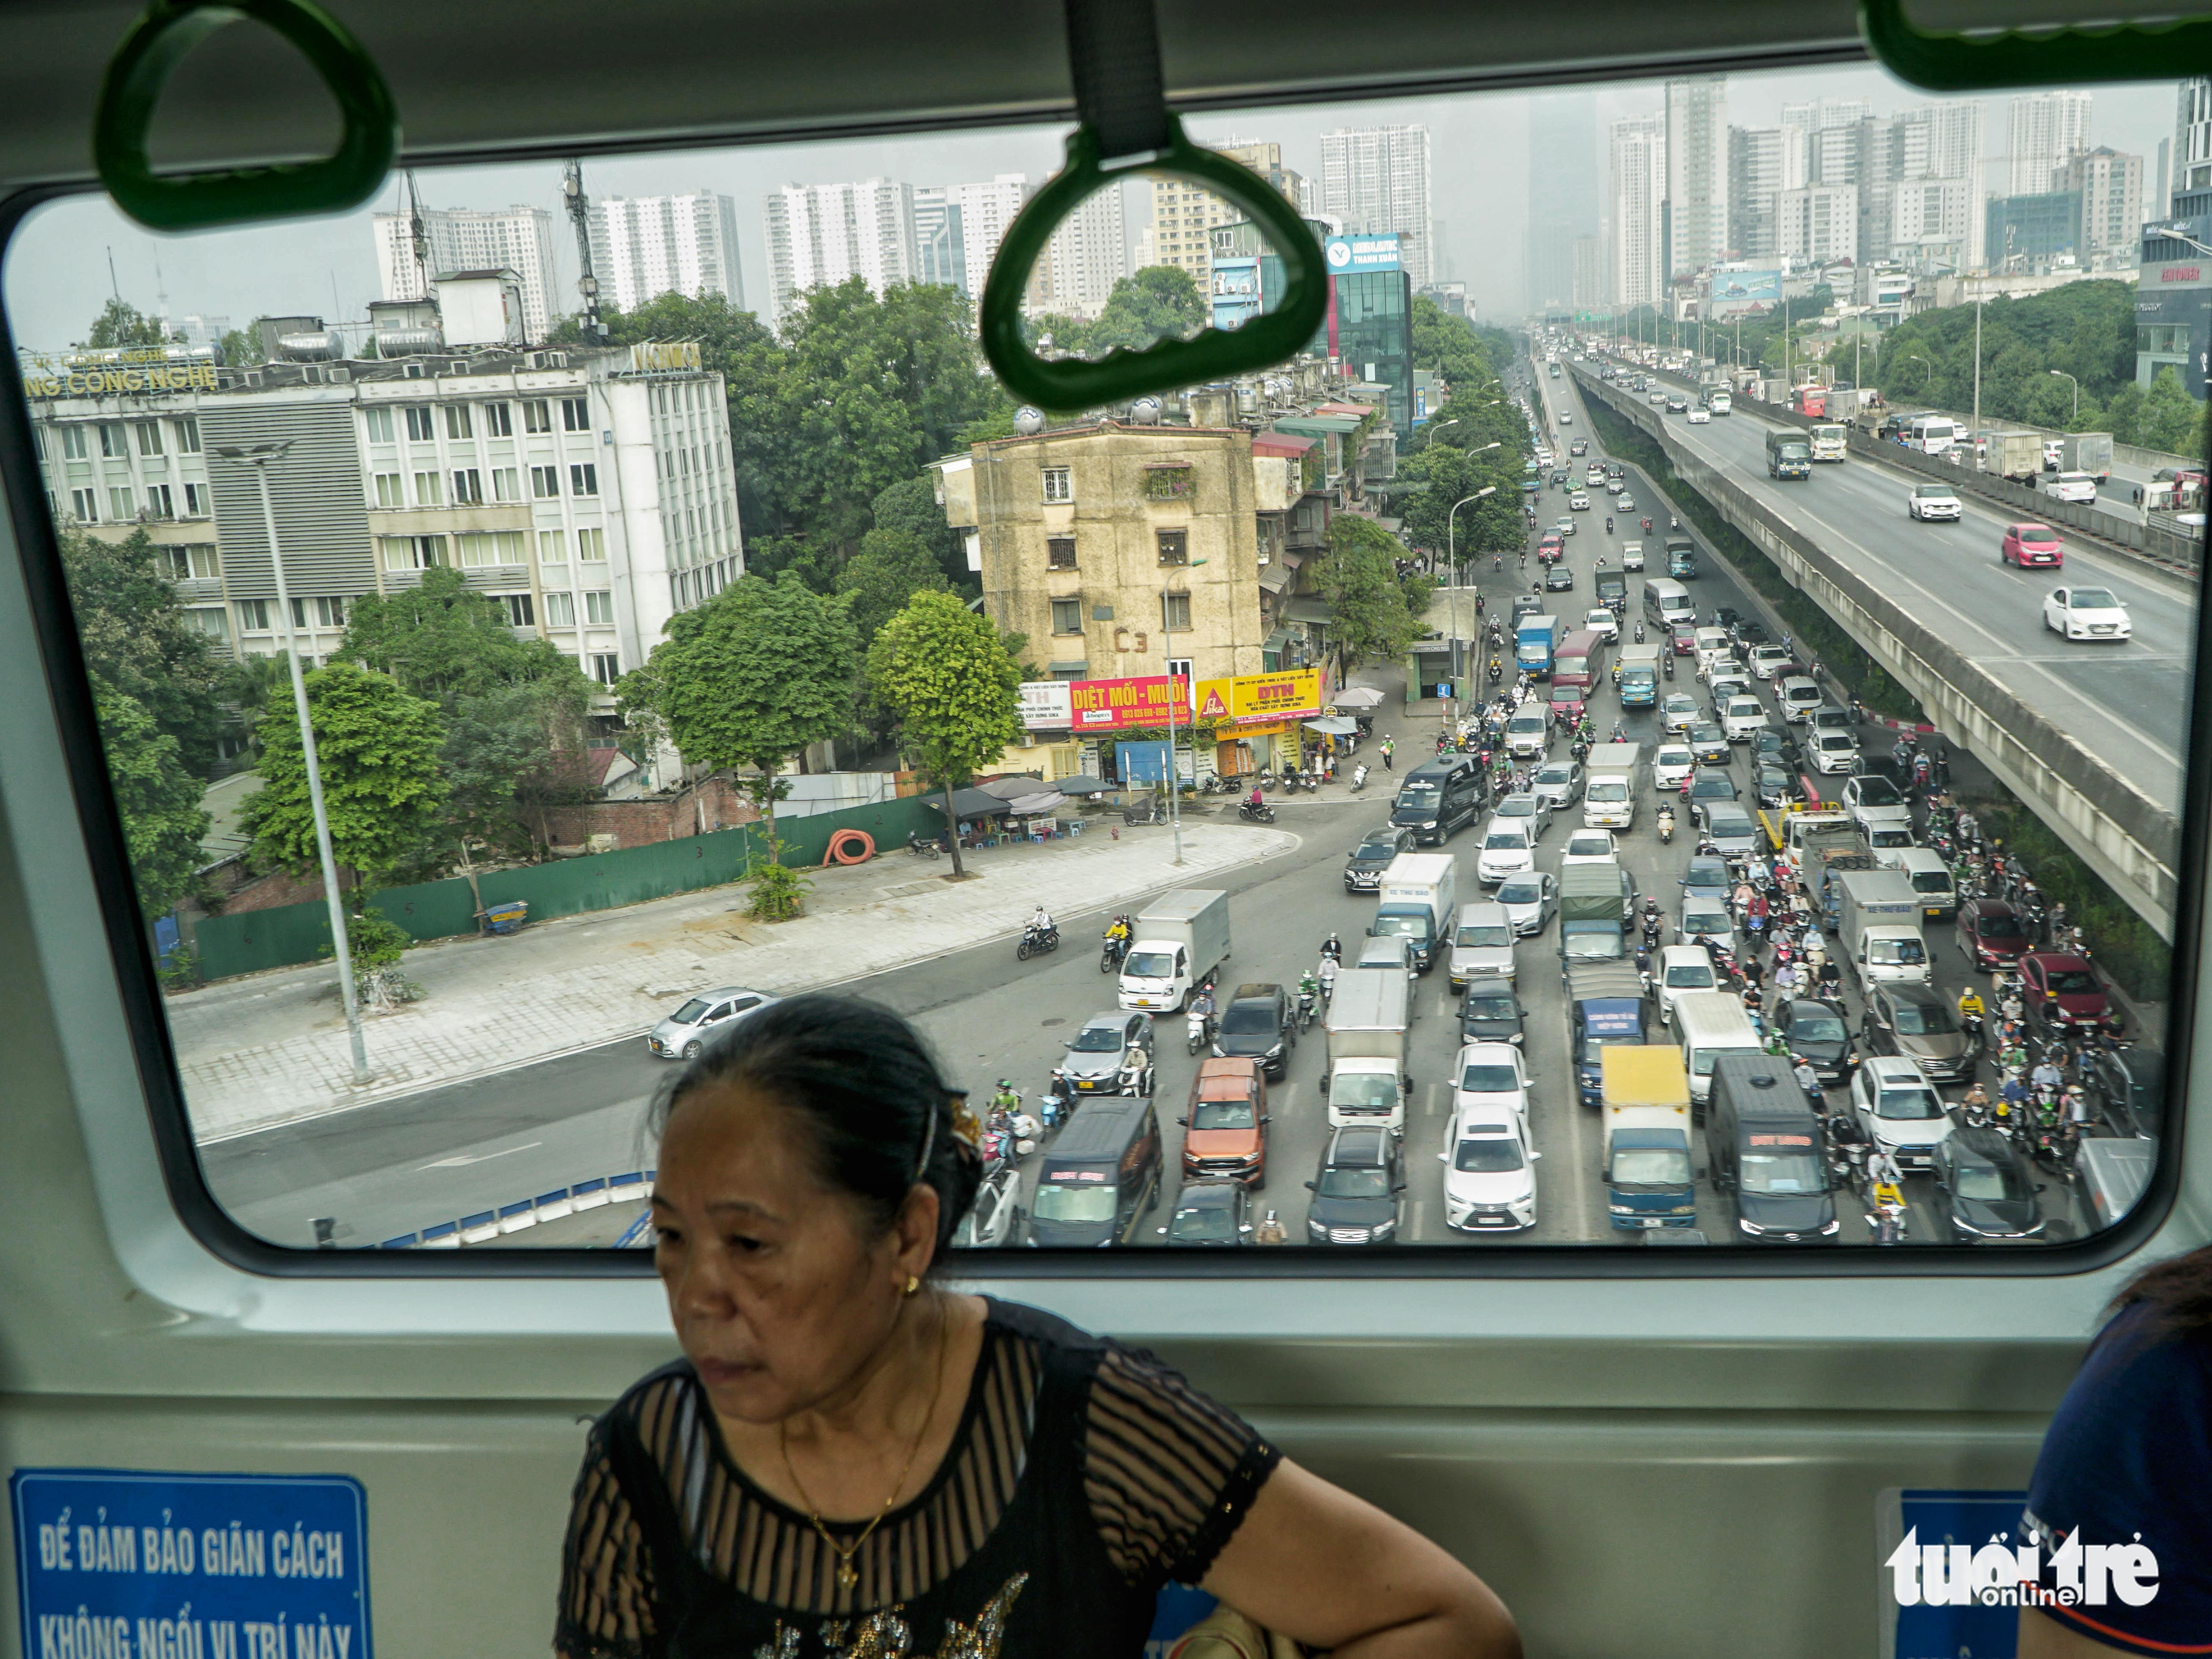 A woman boards the Cat Linh-Ha Dong metro line while automobiles queue on a road below the elevated route in Hanoi, November 16, 2022. Photo: Pham Tuan / Tuoi Tre